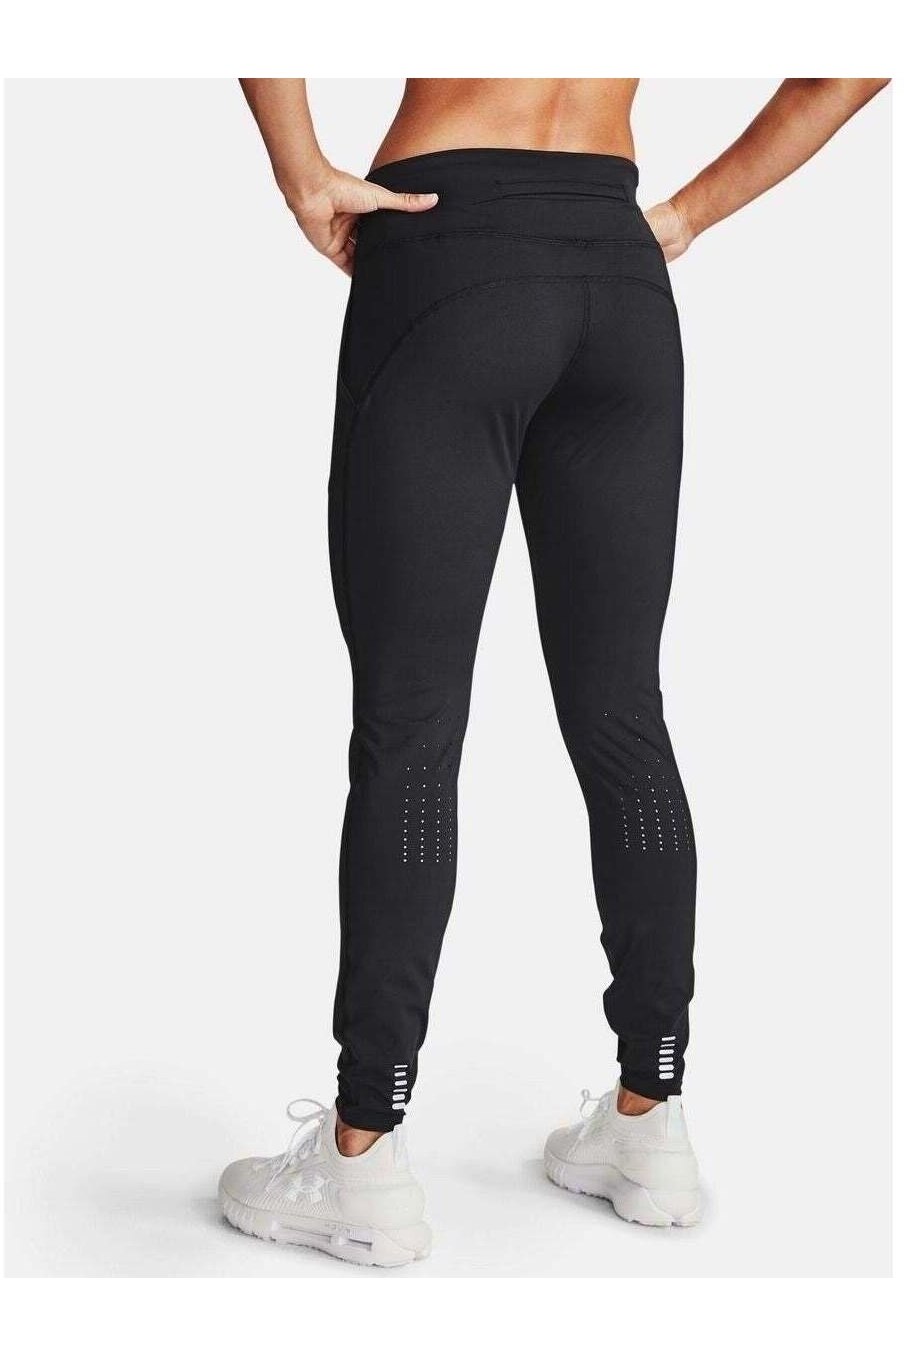 native Tears defense Pantaloni Under Armour Fly Fast 2.0 - eMAG.ro